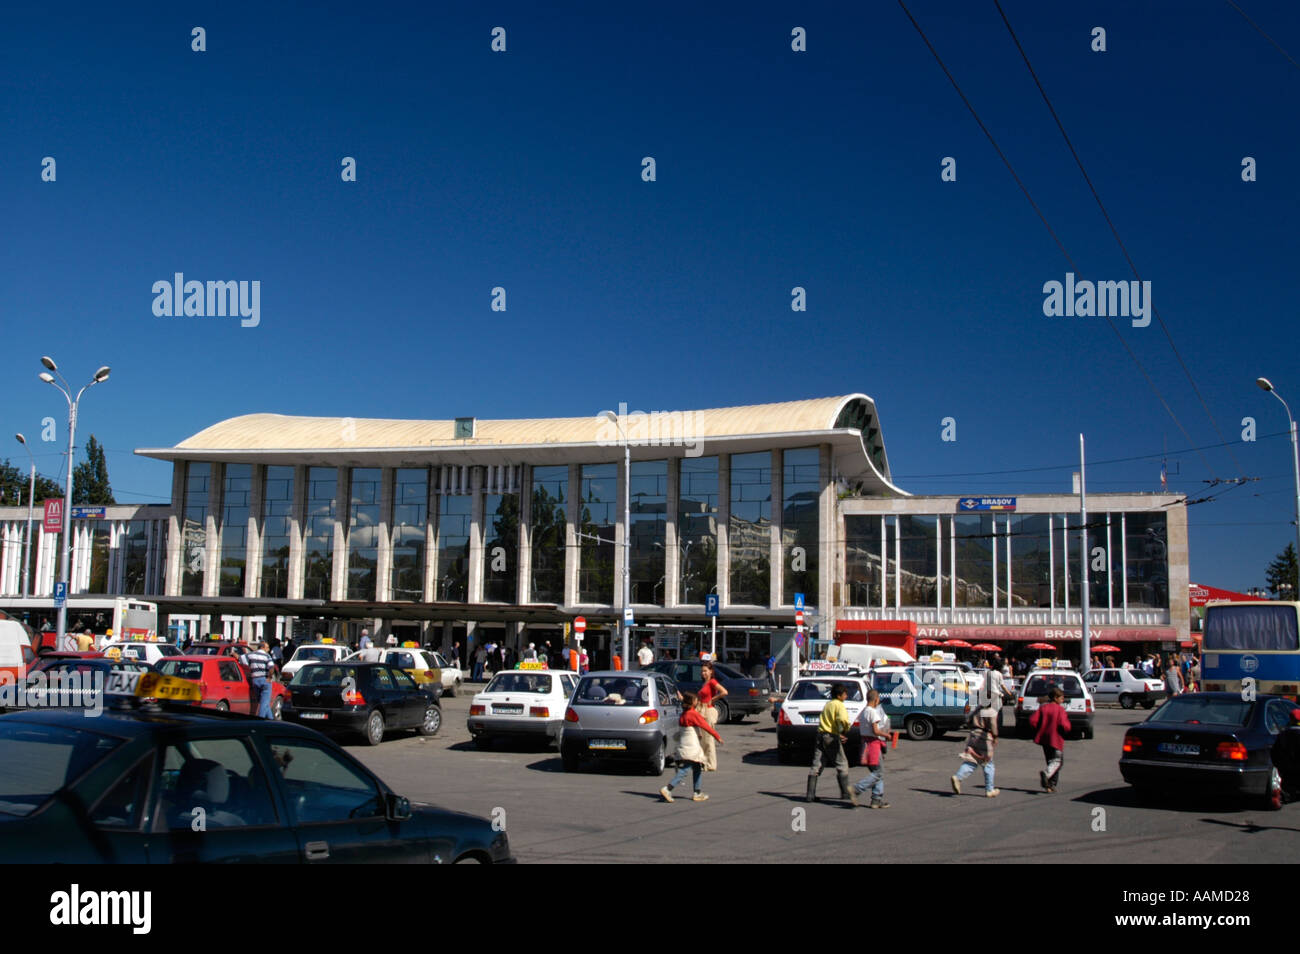 Brasov Railway Station High Resolution Stock Photography and Images - Alamy